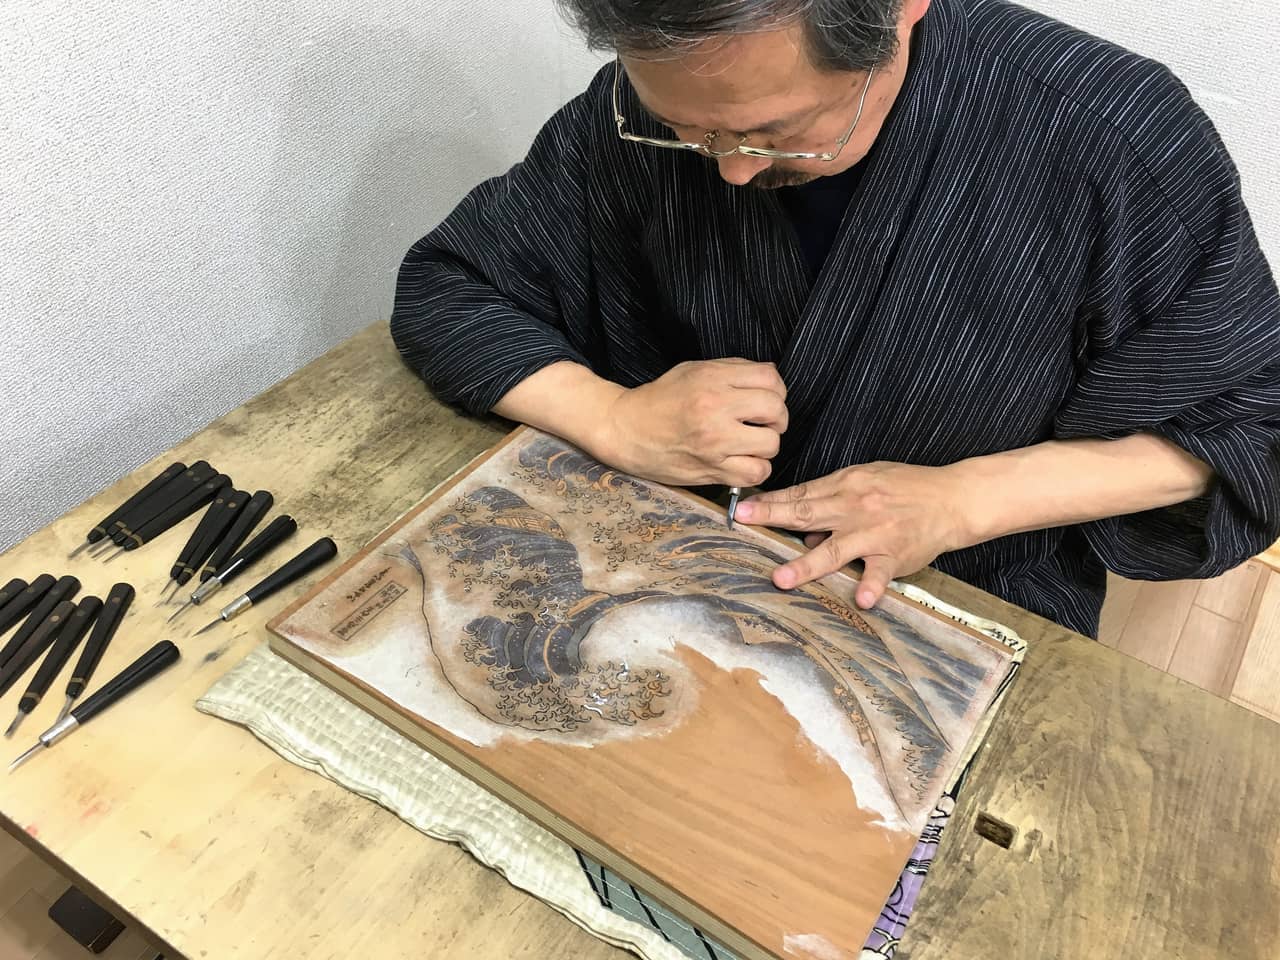 Carve Your Own Ukiyo-e Art: Where Learn Traditional Japanese Woodblock Printing | Tokyo Weekender